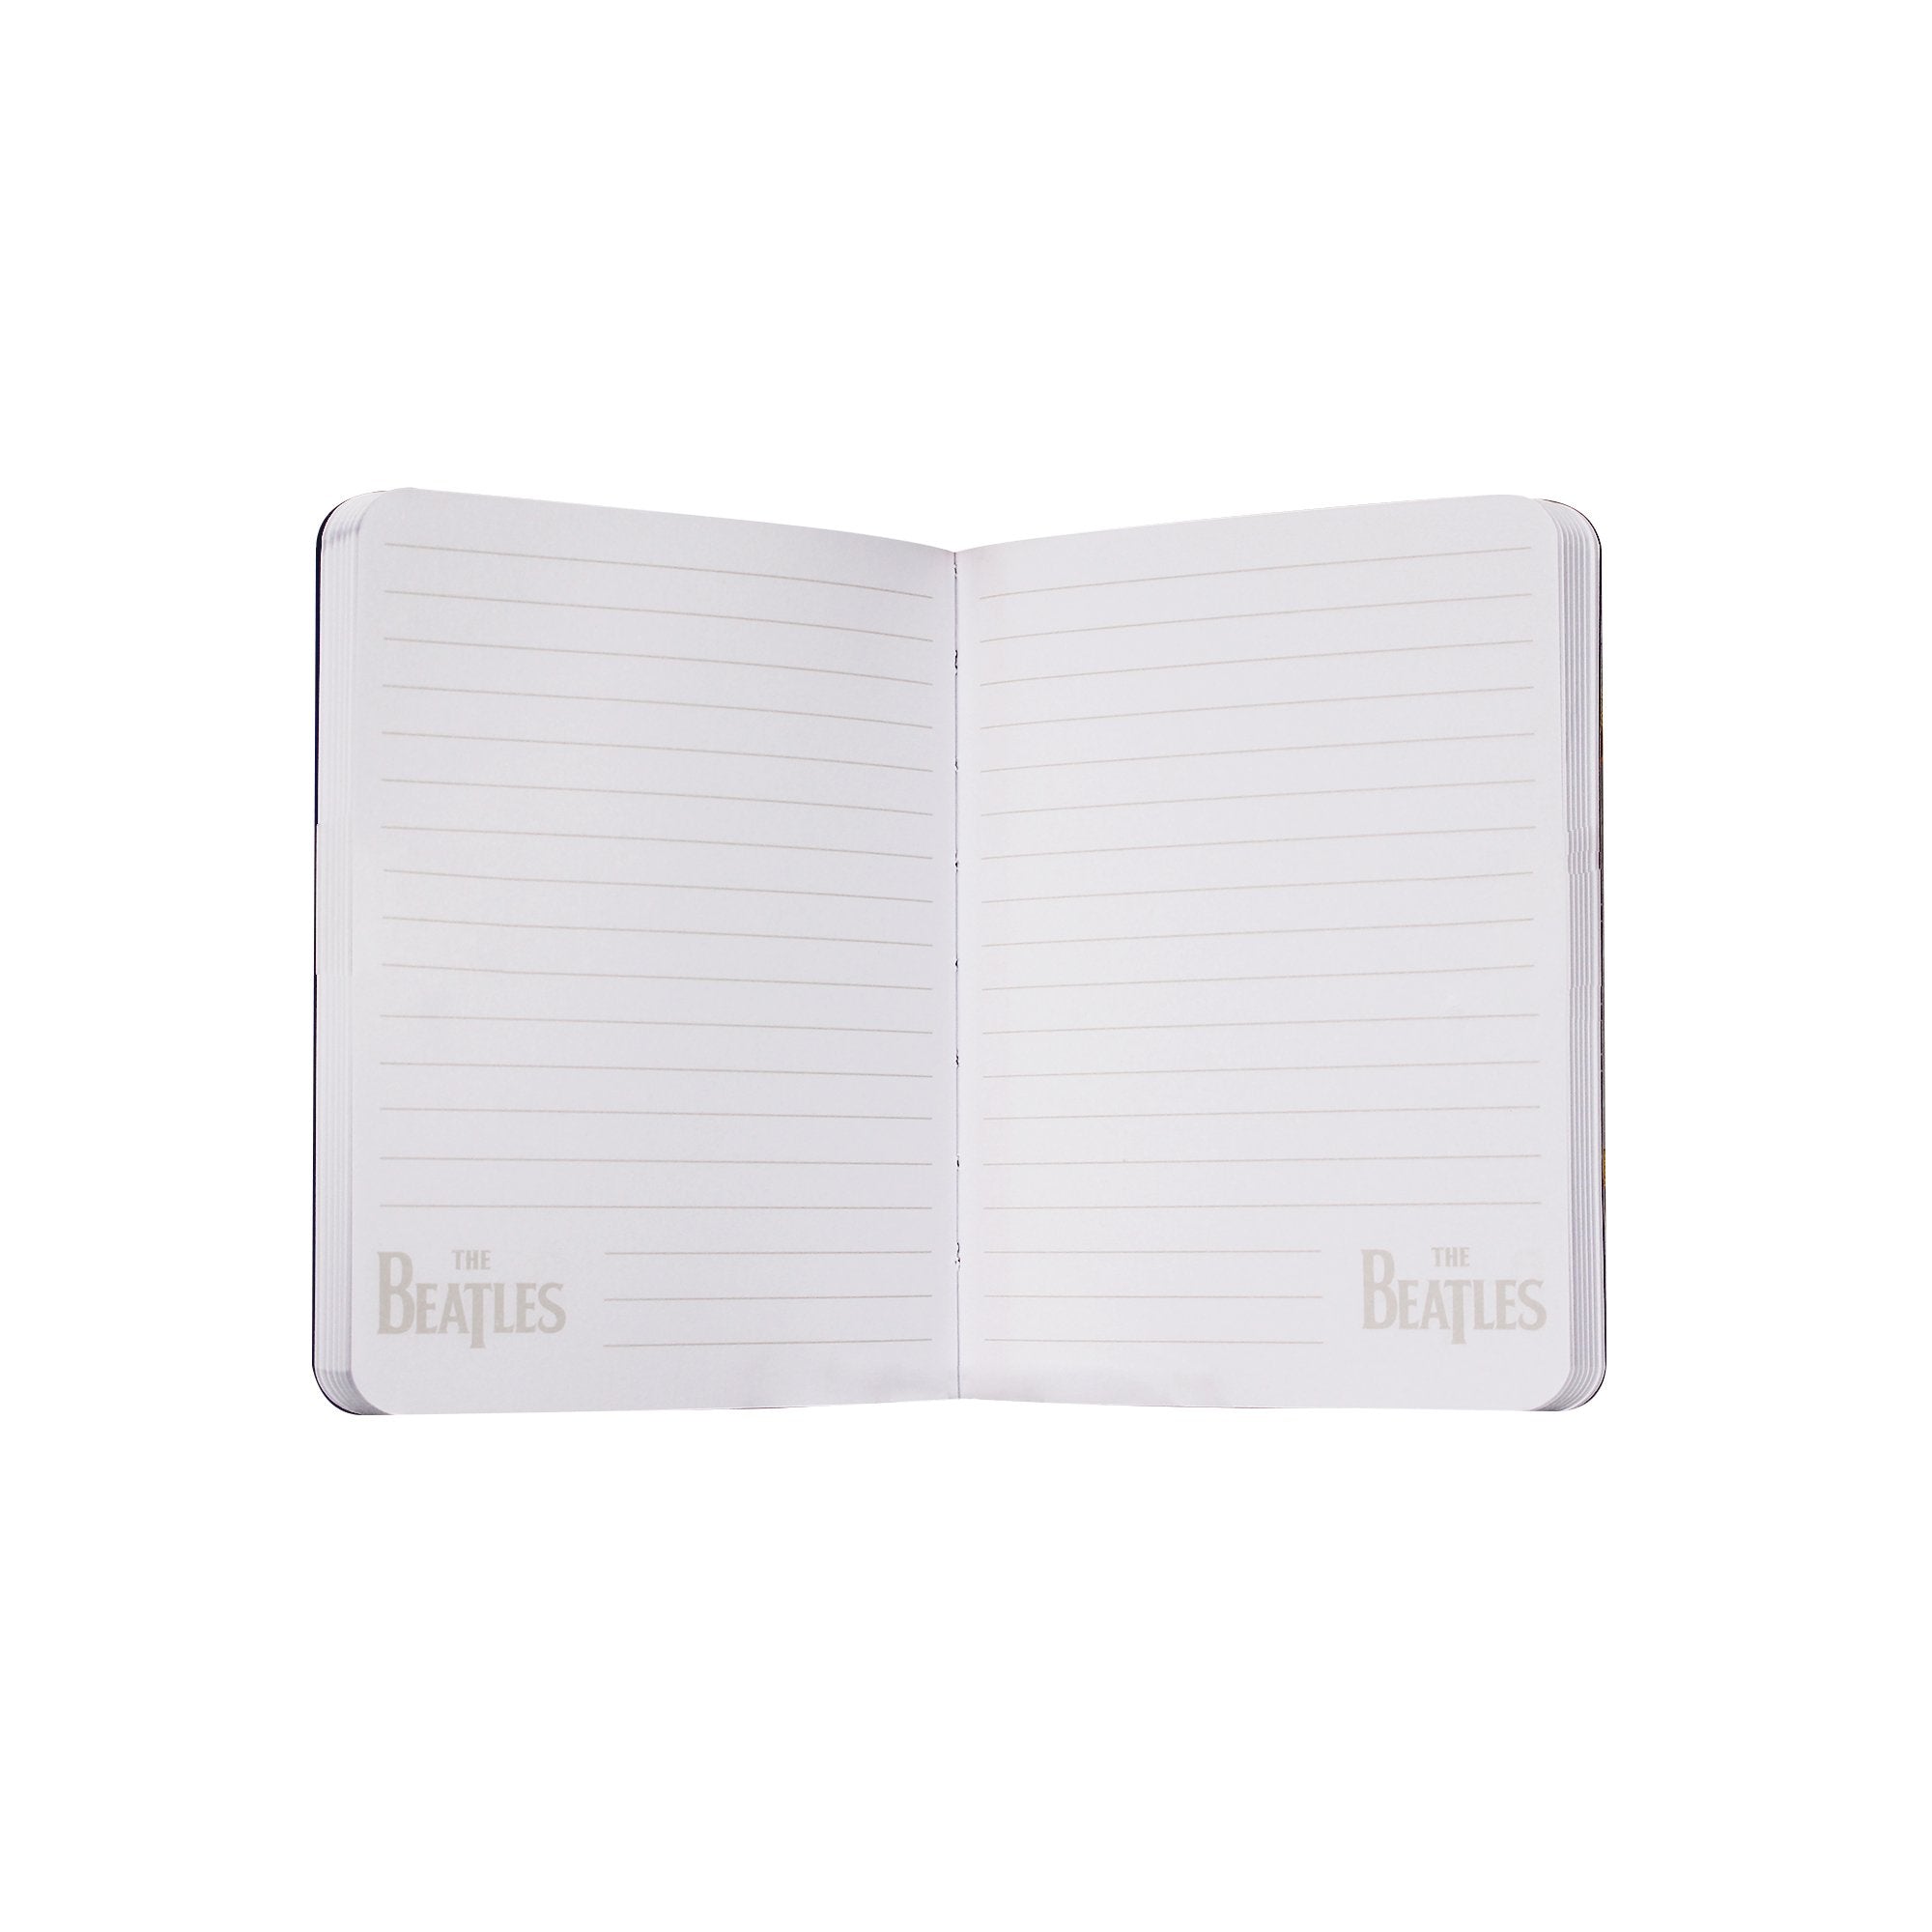 A6 Notebook (Softcover) - The Beatles (We Can Work It Out)